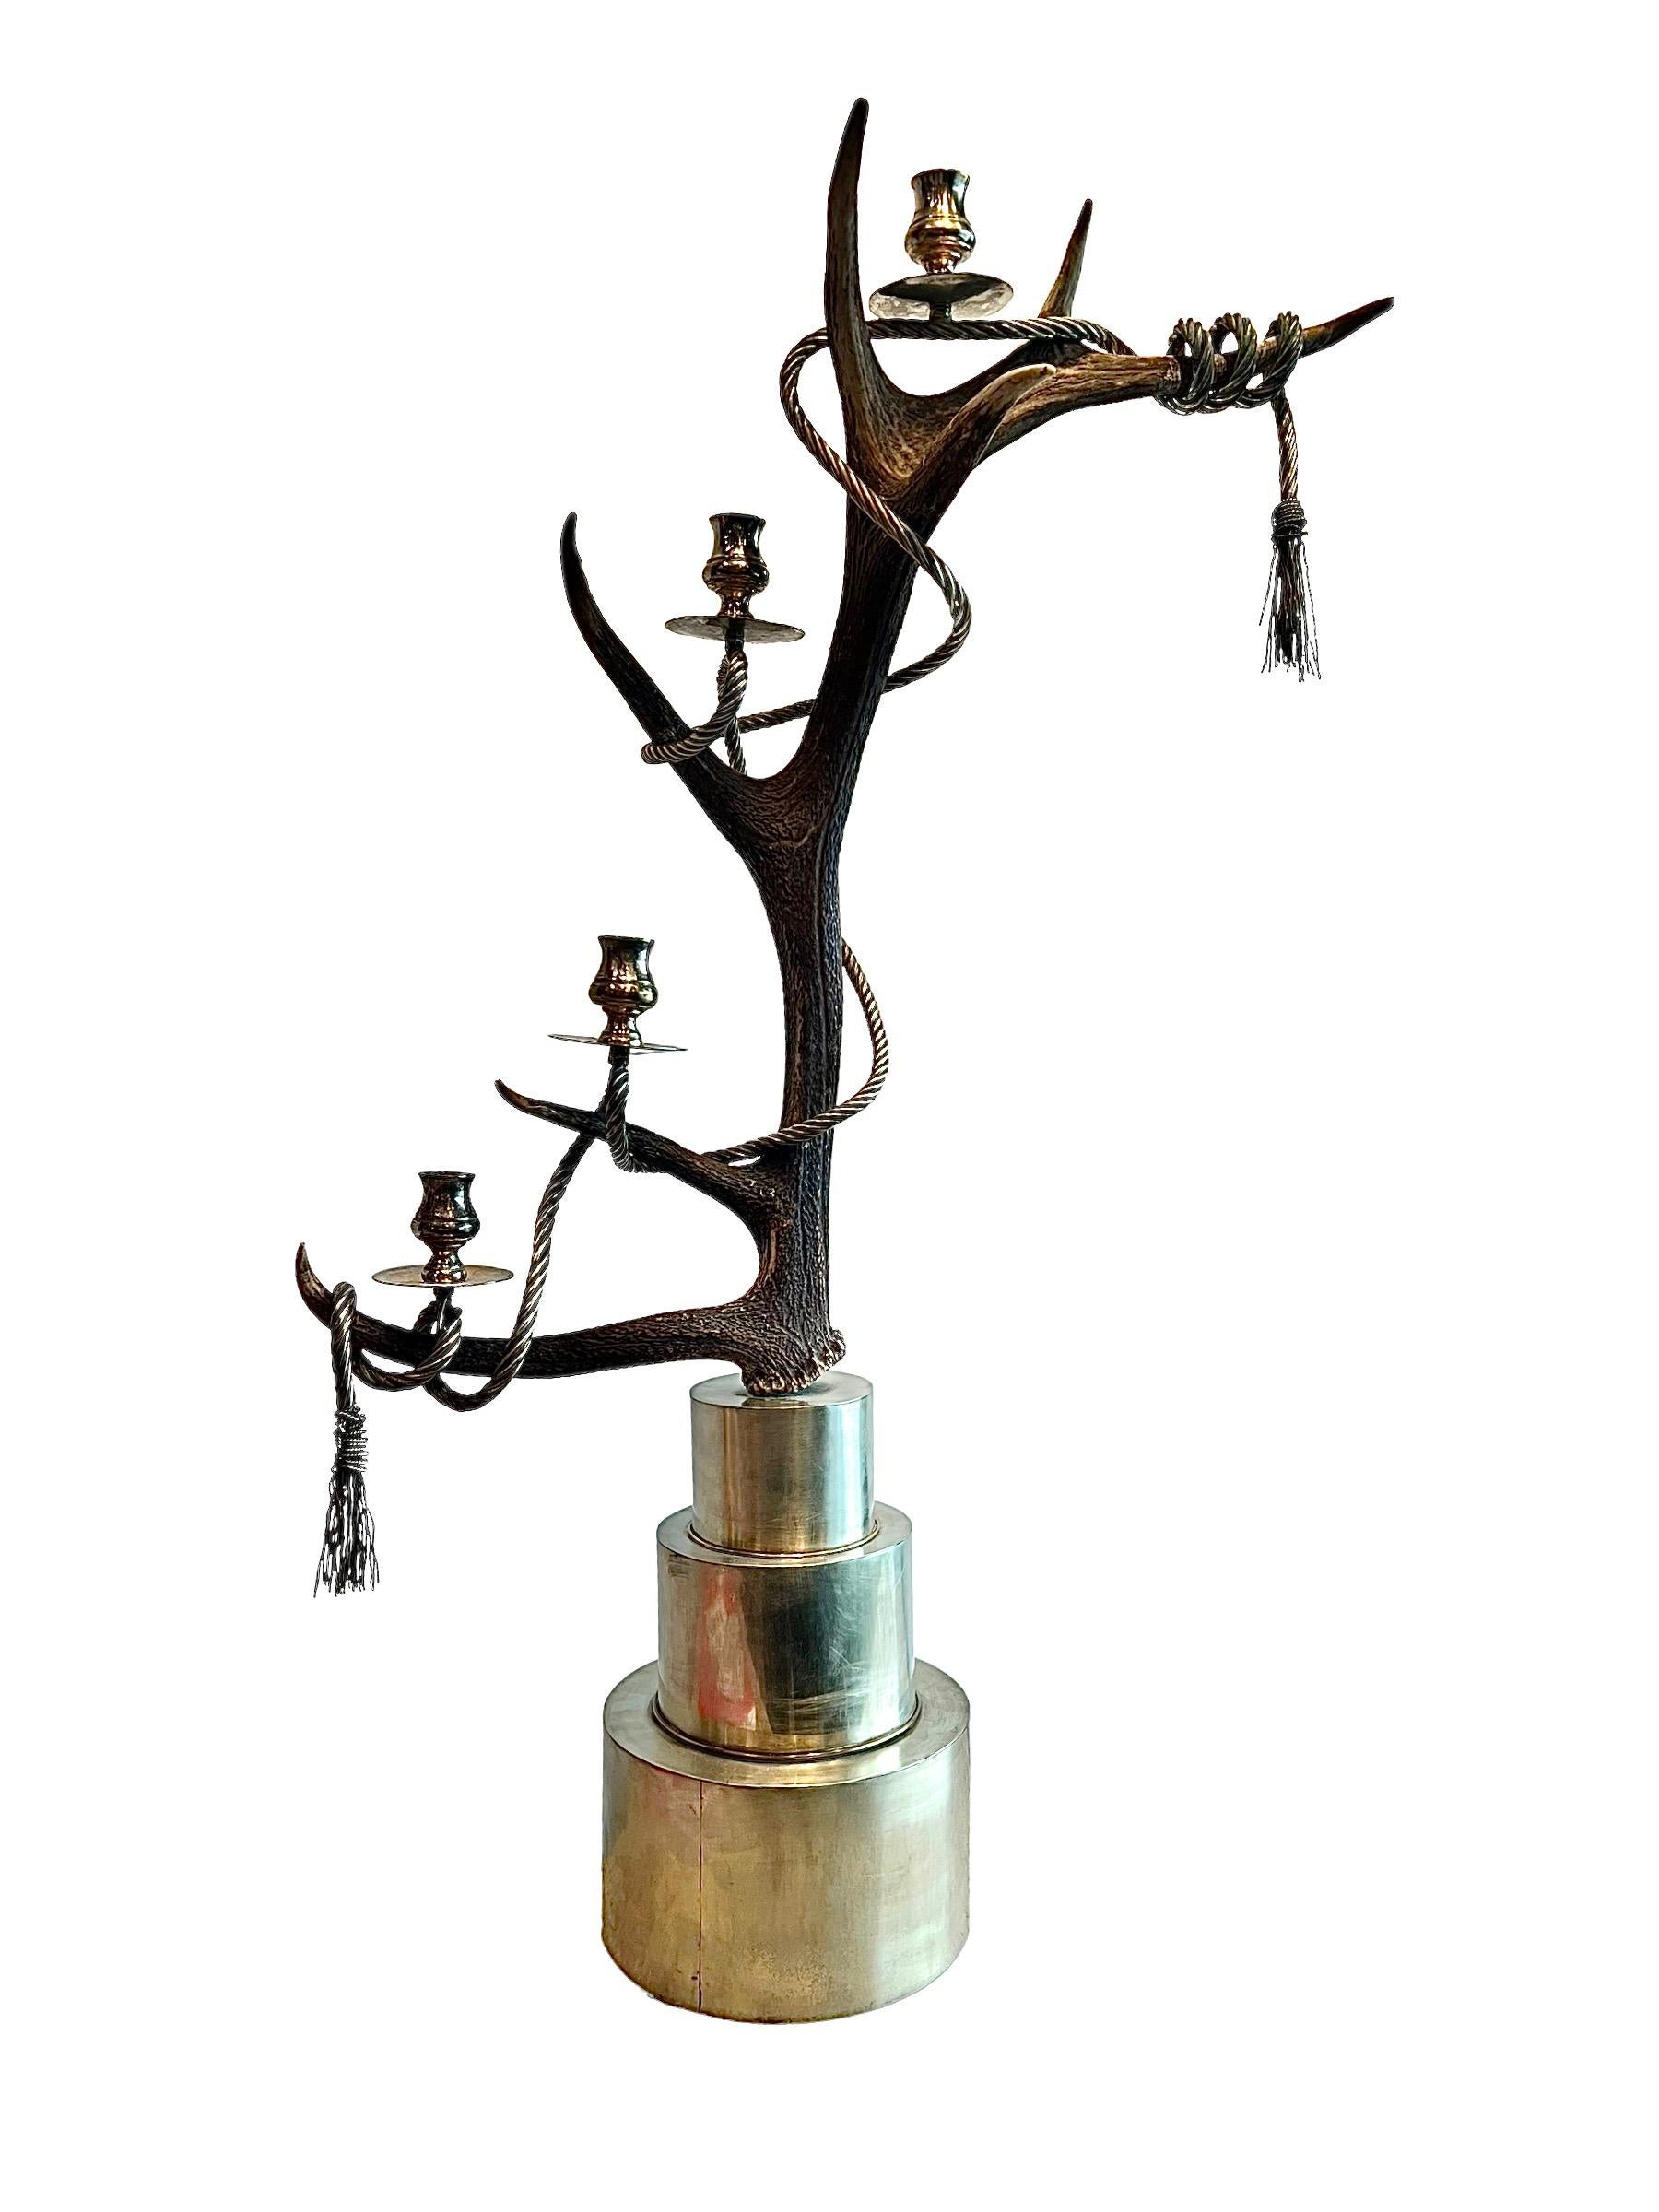 Prepare to be captivated by an extraordinary and fantastical duo of antler candelabra, masterfully transformed into unique art pieces by the visionary artist Anthony Redmile. These remarkable creations are a bold fusion of nature's beauty and